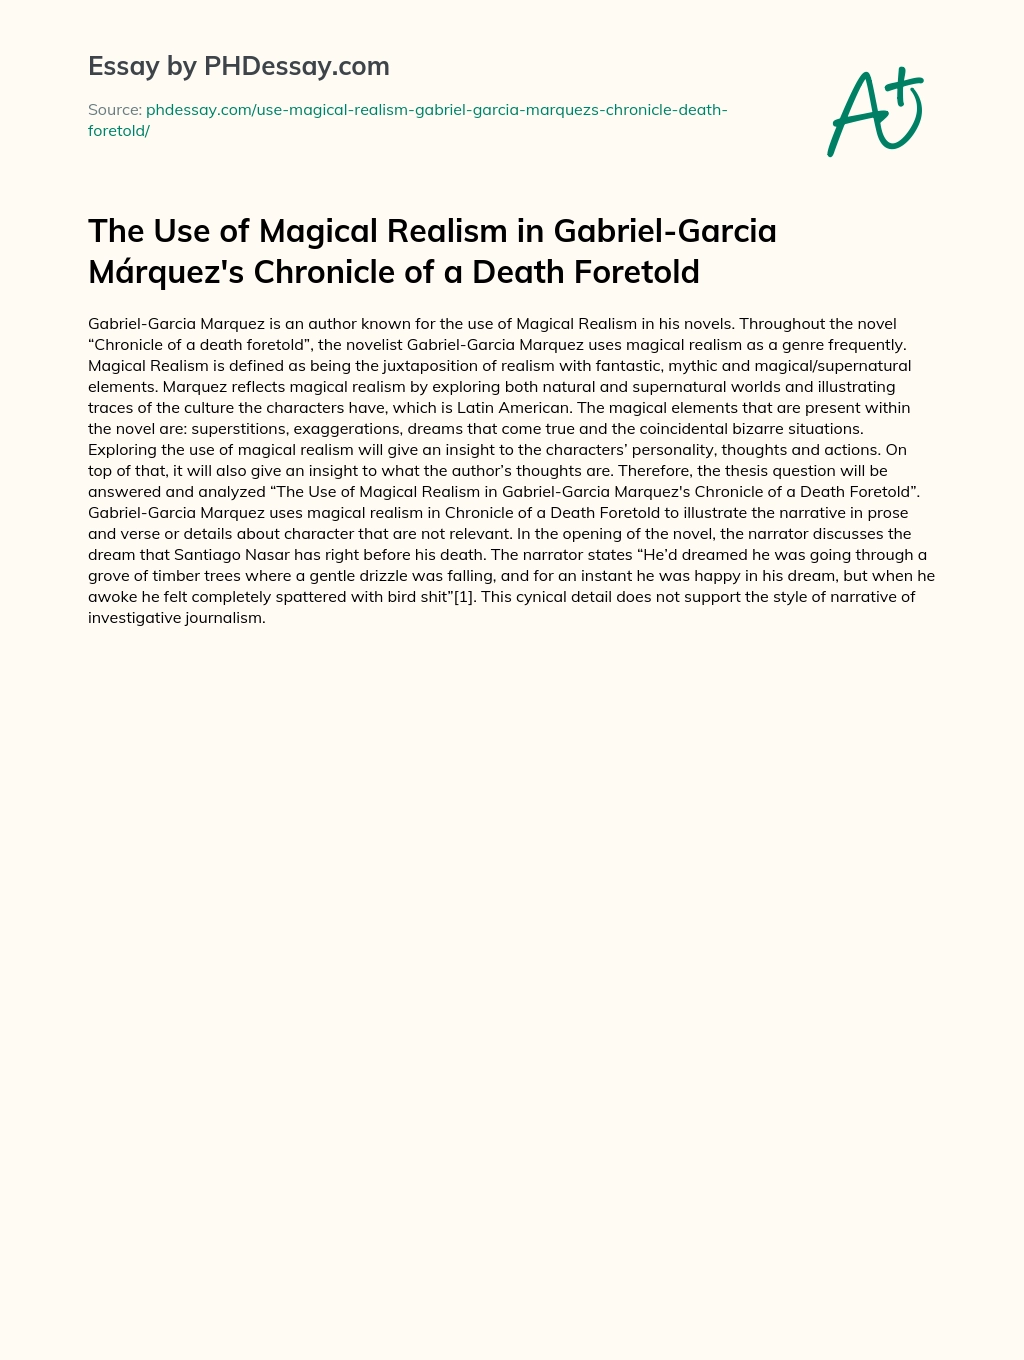 The Use of Magical Realism in Gabriel-Garcia Márquez’s Chronicle of a Death Foretold essay